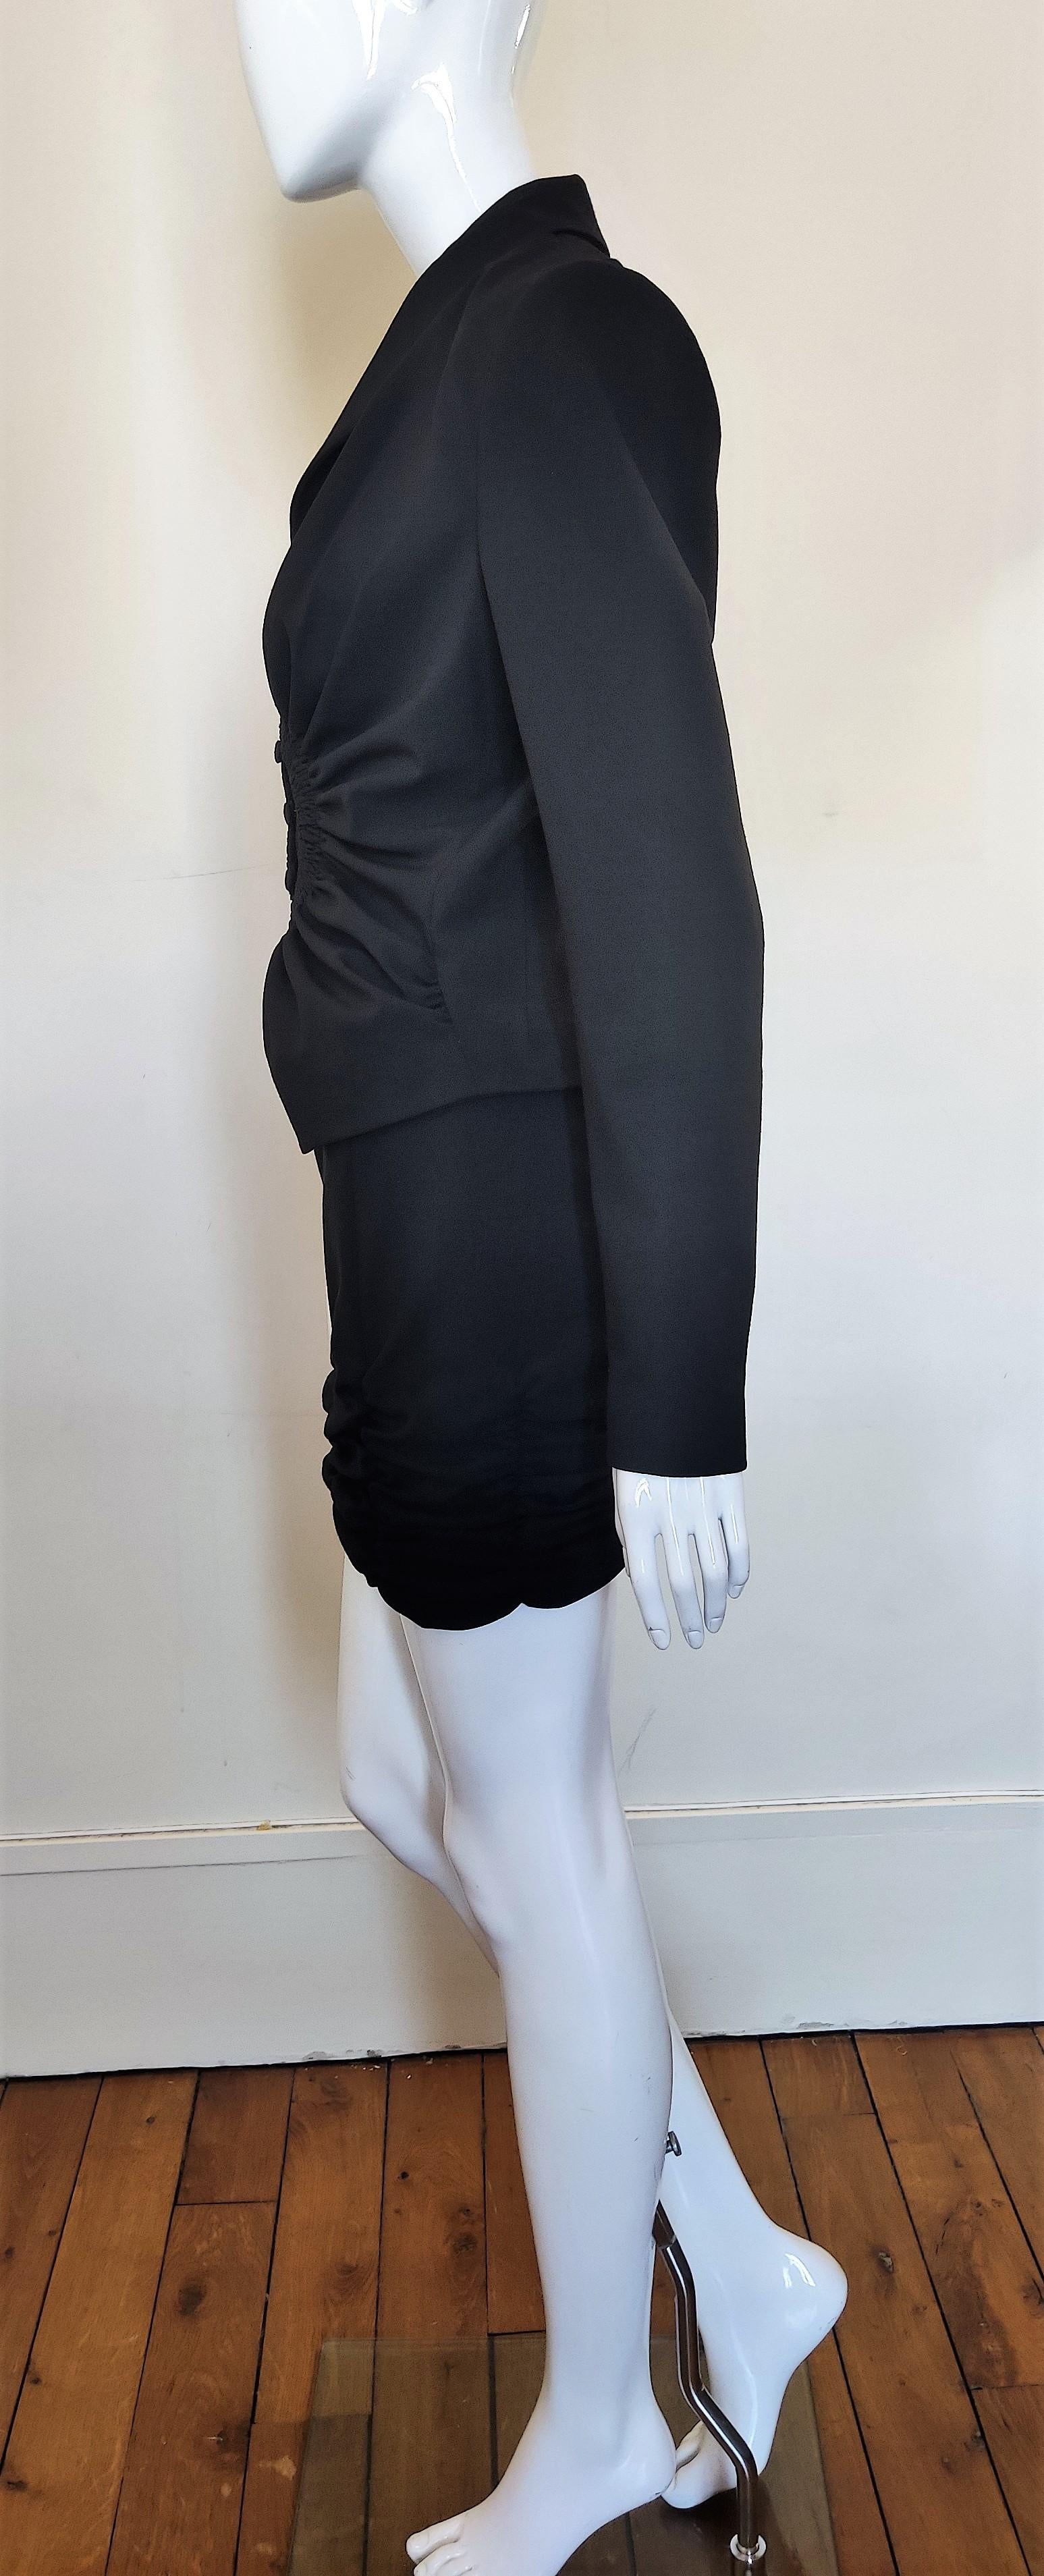 Early John Galliano Ruched Vintage 90s Runway Jacket Skirt Ensemble Dress Suit 3